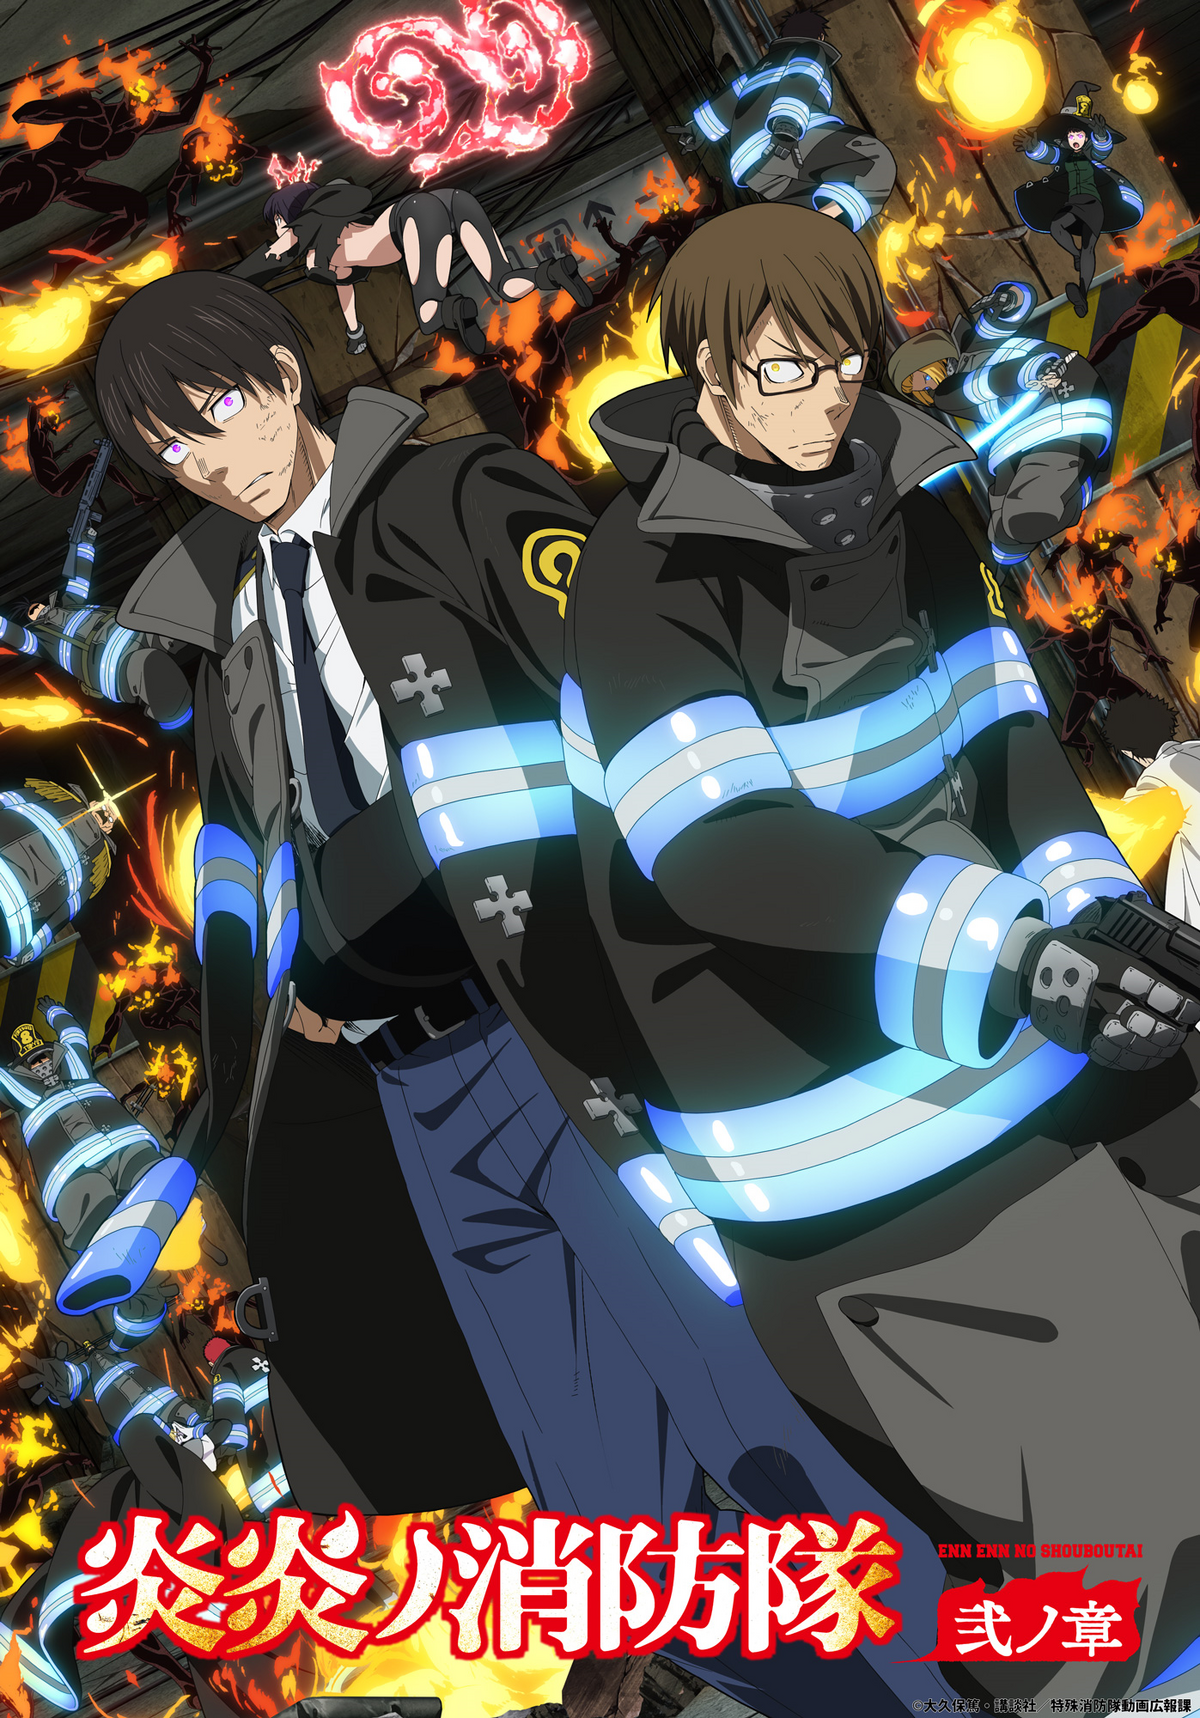 Anime Trending on X: Fire Force Season 2 Haijima Industries arc - New  Visual! New Opening theme song artist for Fire Force Season 2 2nd-Cour has  been announced!! OP: Kana-Boon 「Torch of